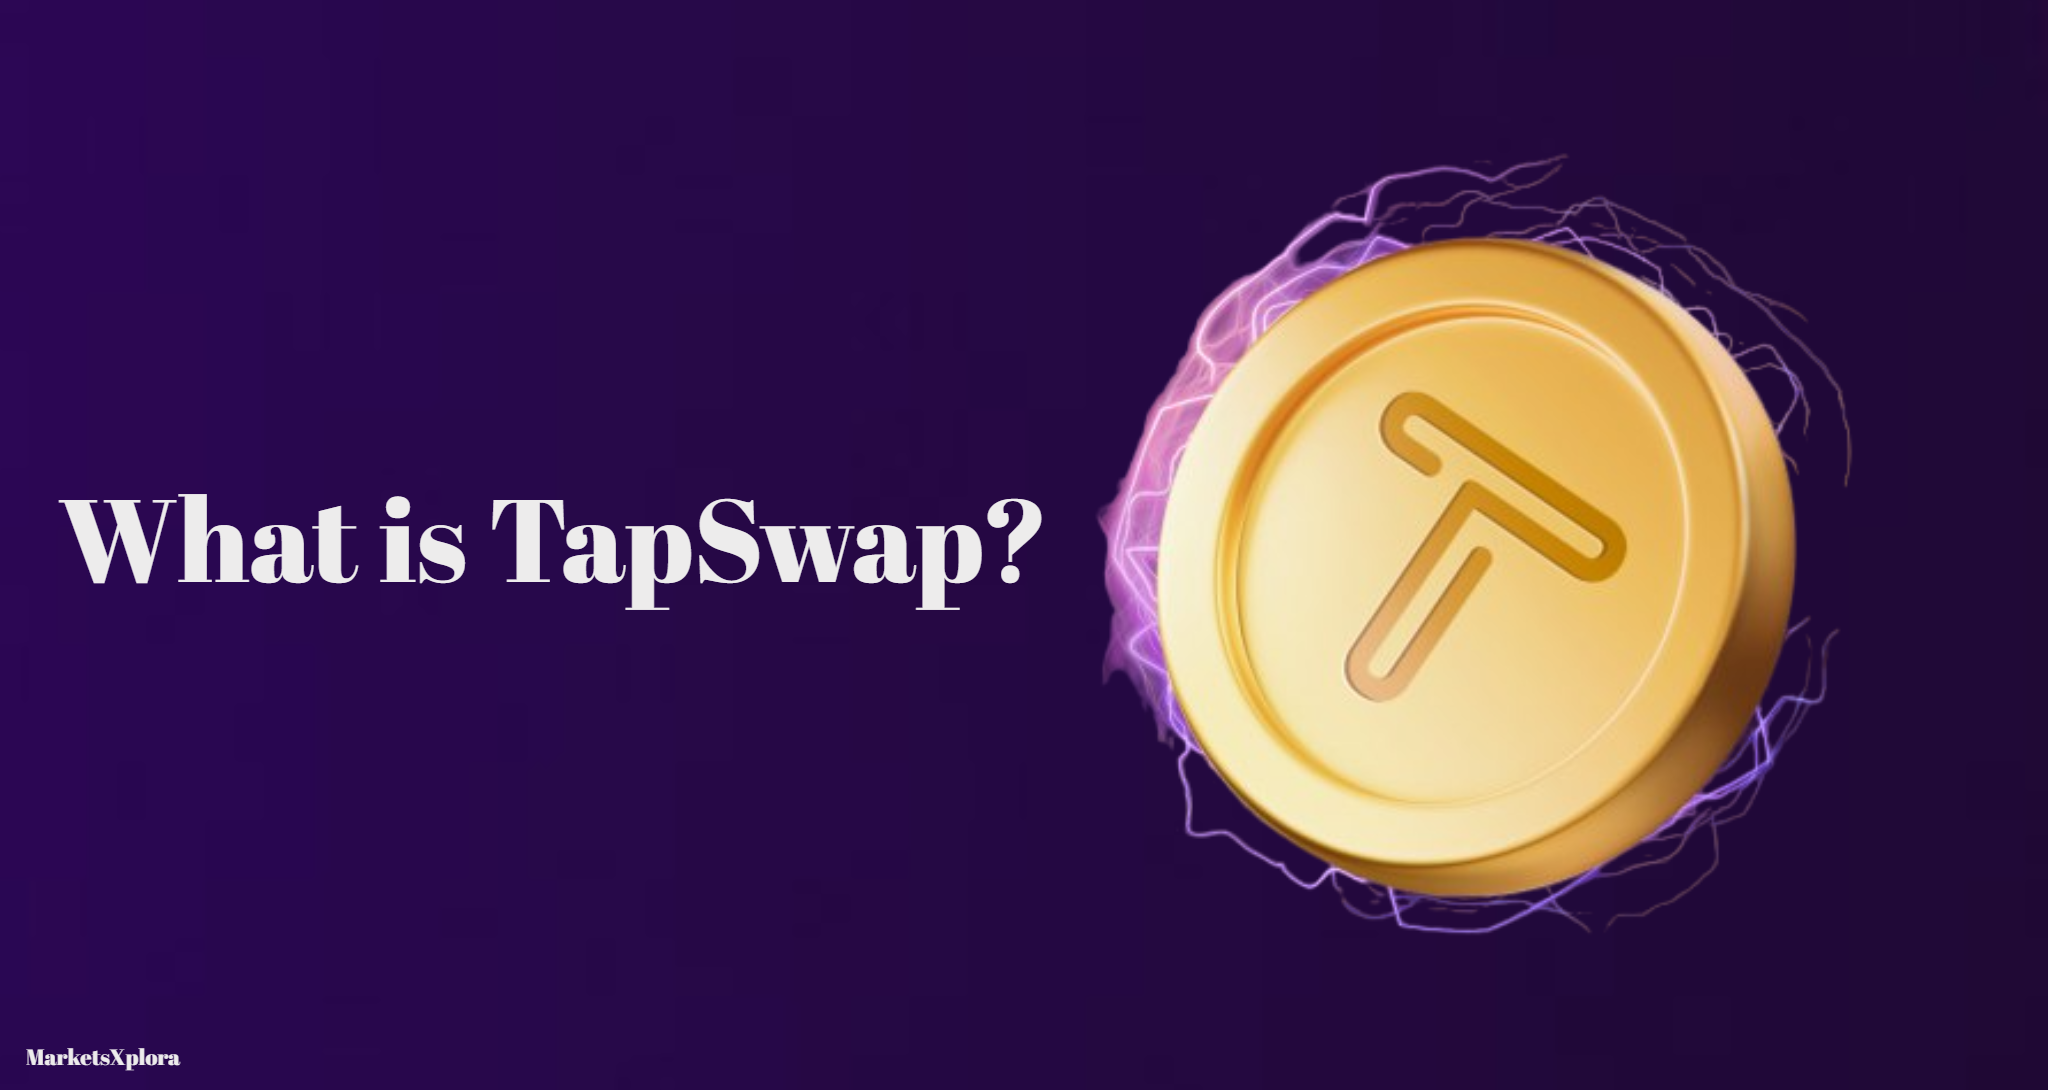 What is TapSwap? Is it a legit opportunity or just another crypto scam?" Join us as we dive deep into the platform, separating fact from fiction and helping you decide if TapSwap is worth your consideration.